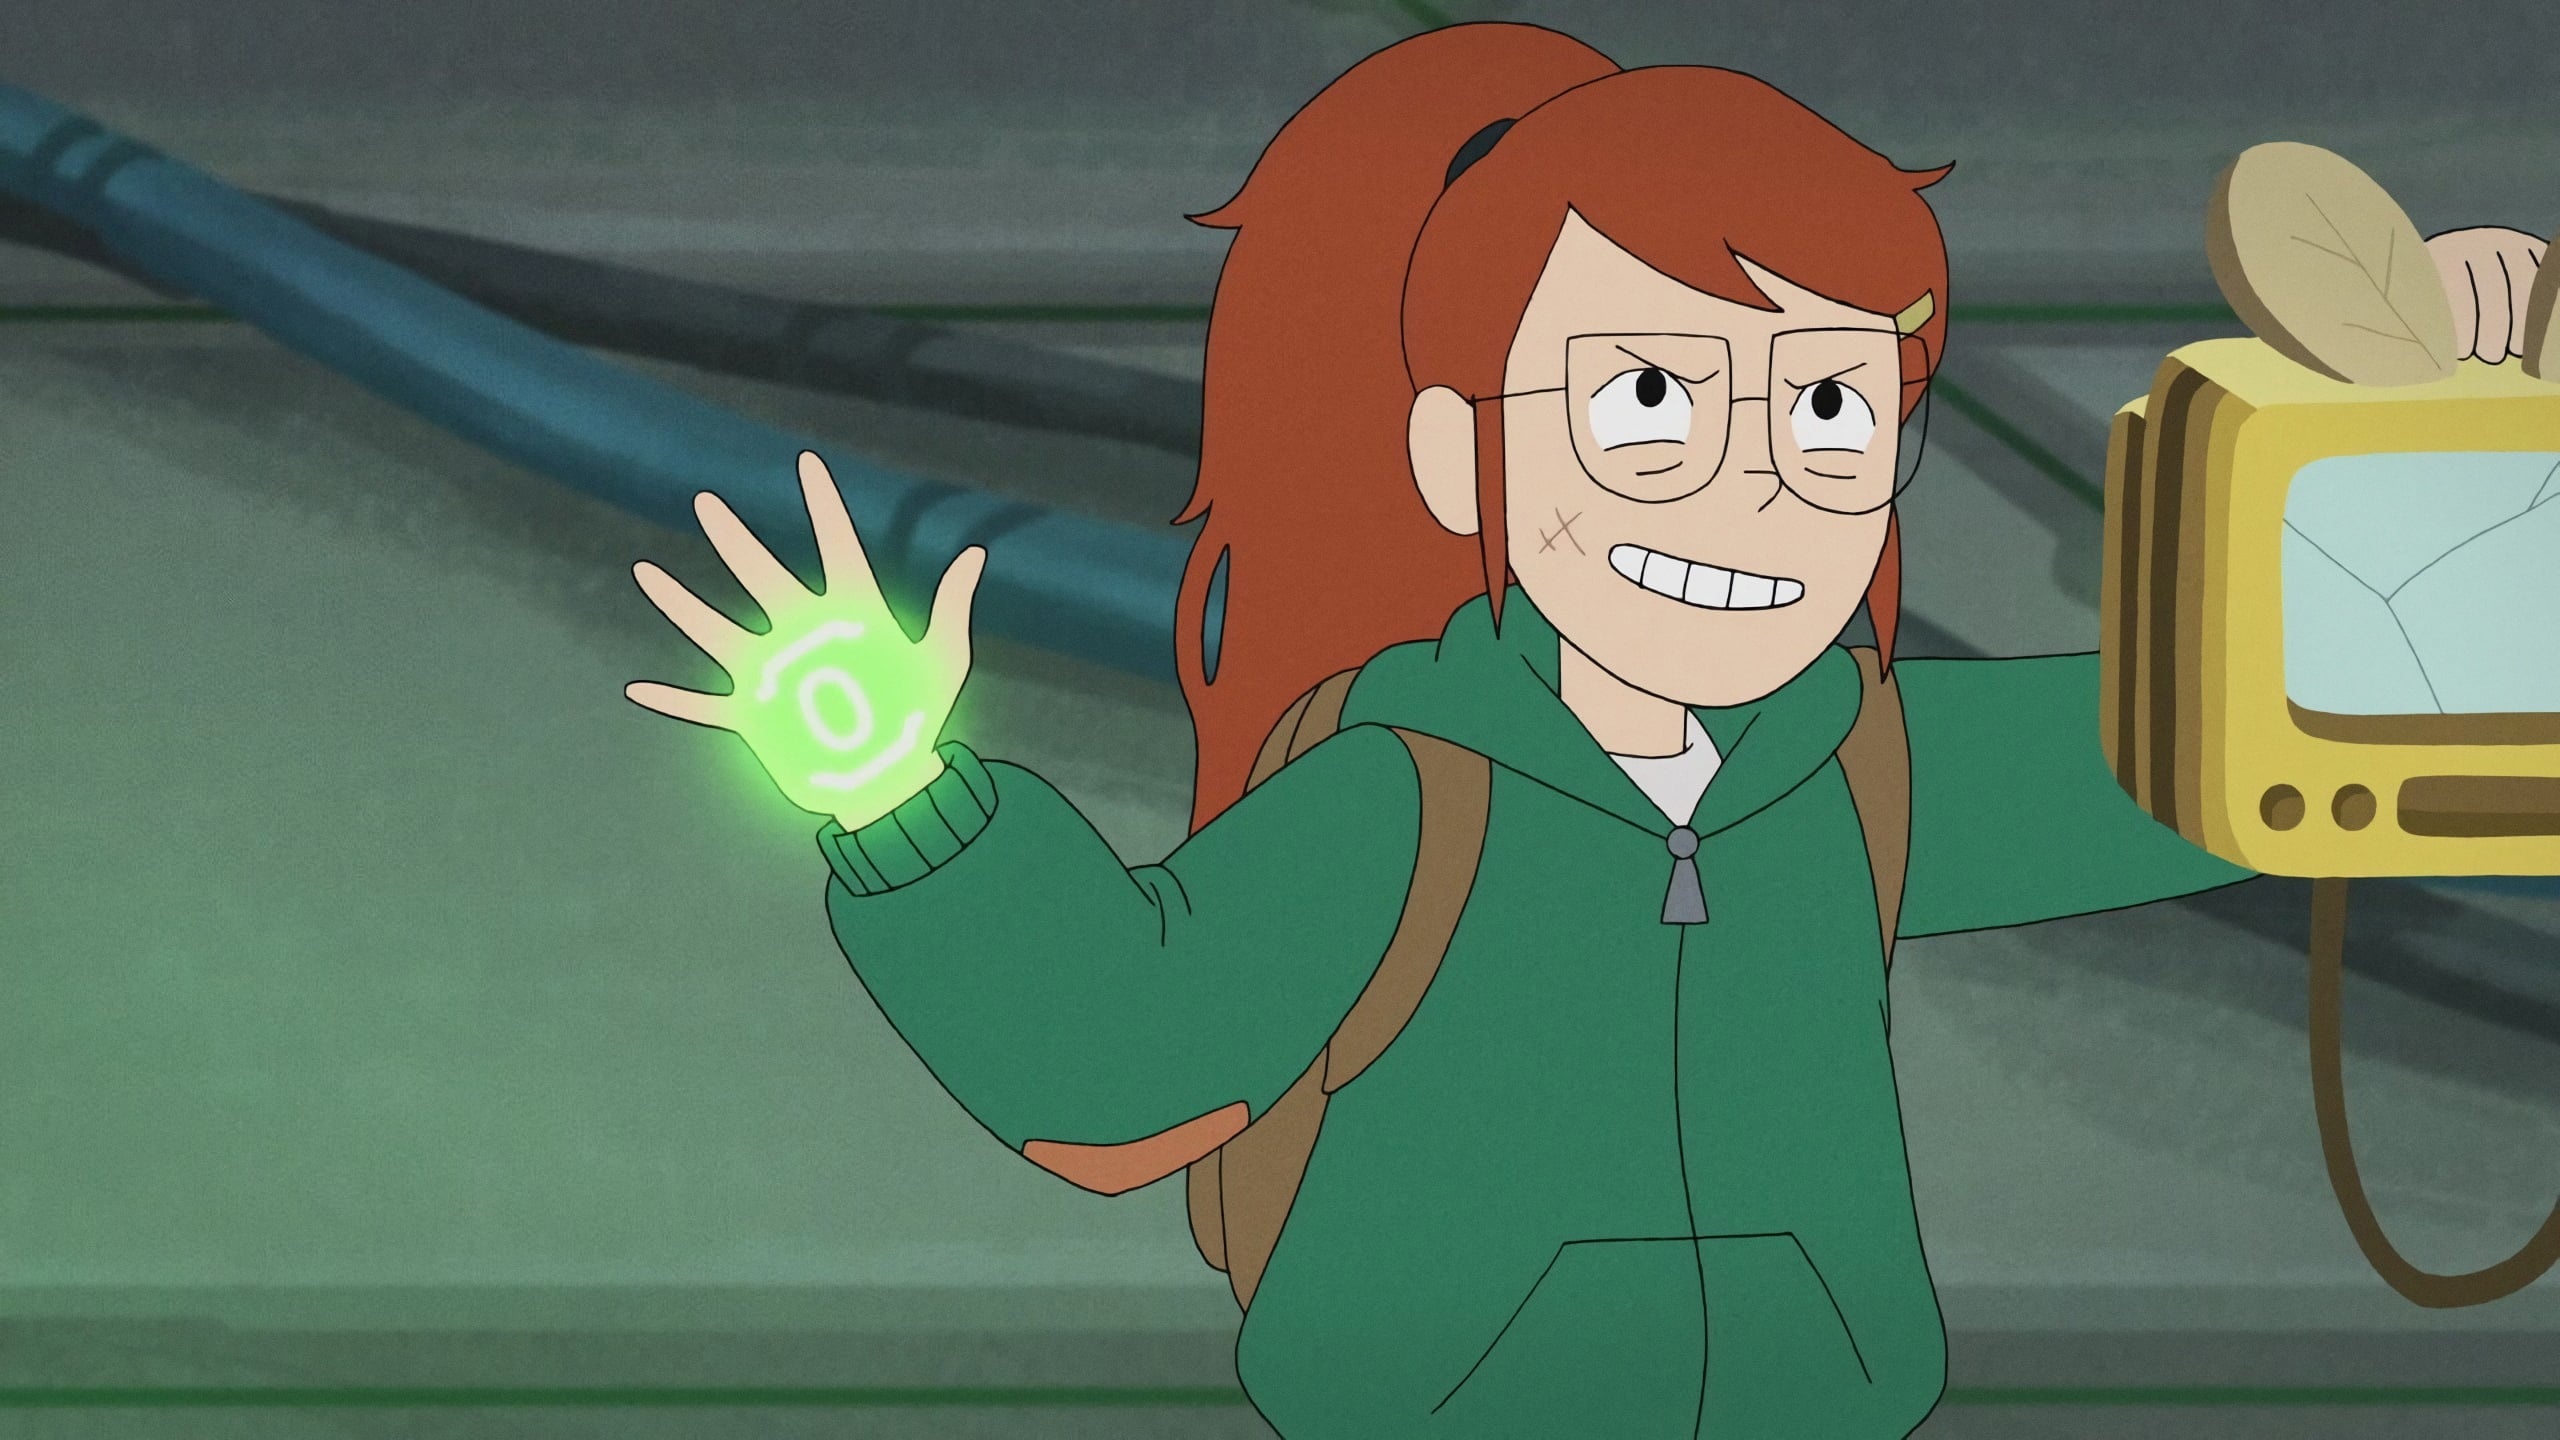 Infinity Train: Tulip, searching for a way home with One-One and Atticus. 2560x1440 HD Wallpaper.